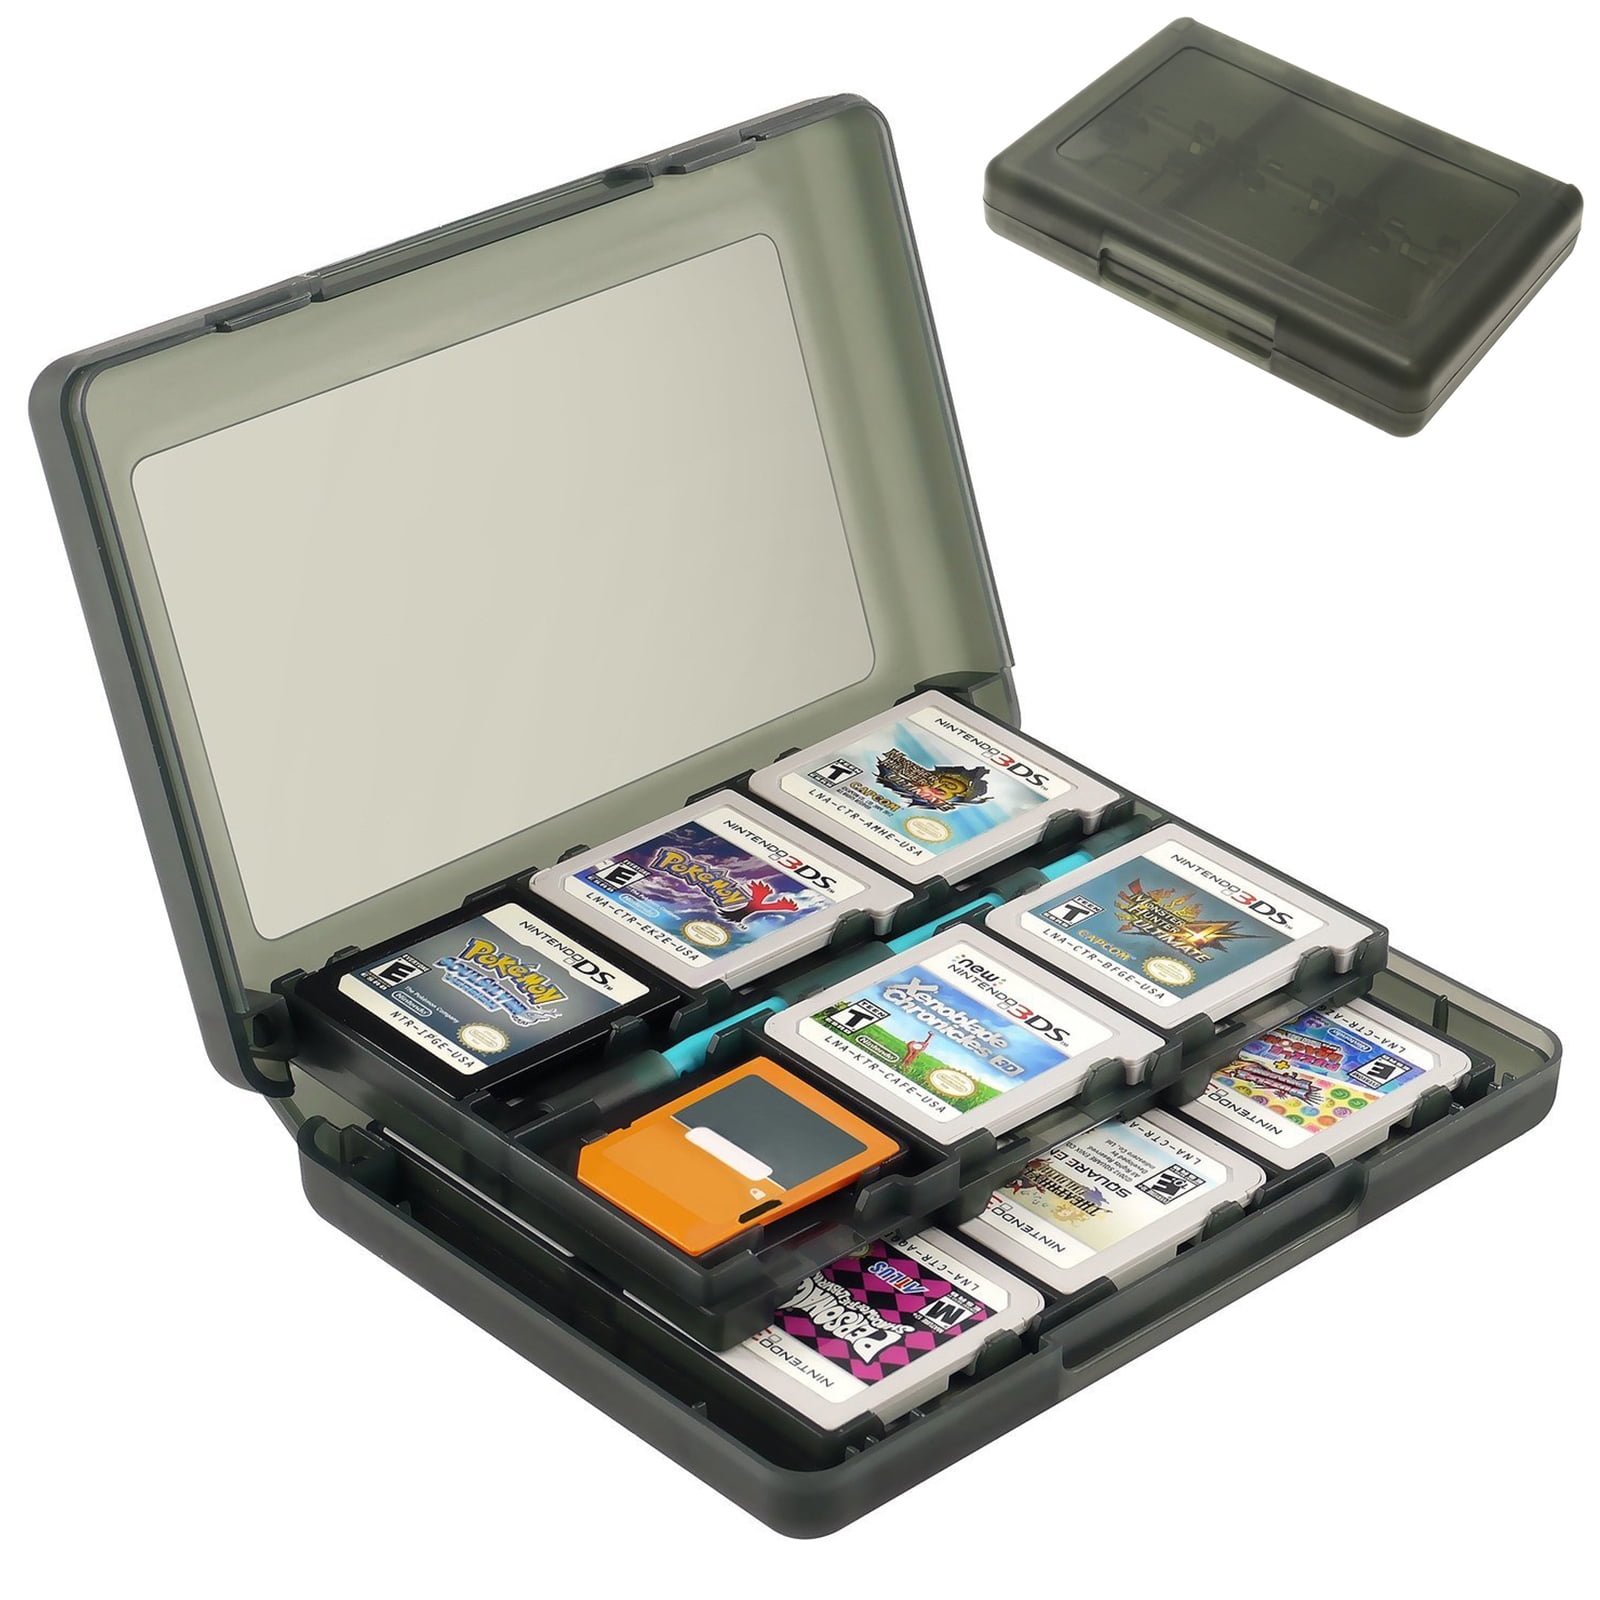 TSV 28 in 1 Game Card Case Holder Fit for New 3DS / 3DS / Dsi / Dsi XL / Dsi LL/ DS / DS Lite, Game Card Carrying Case,